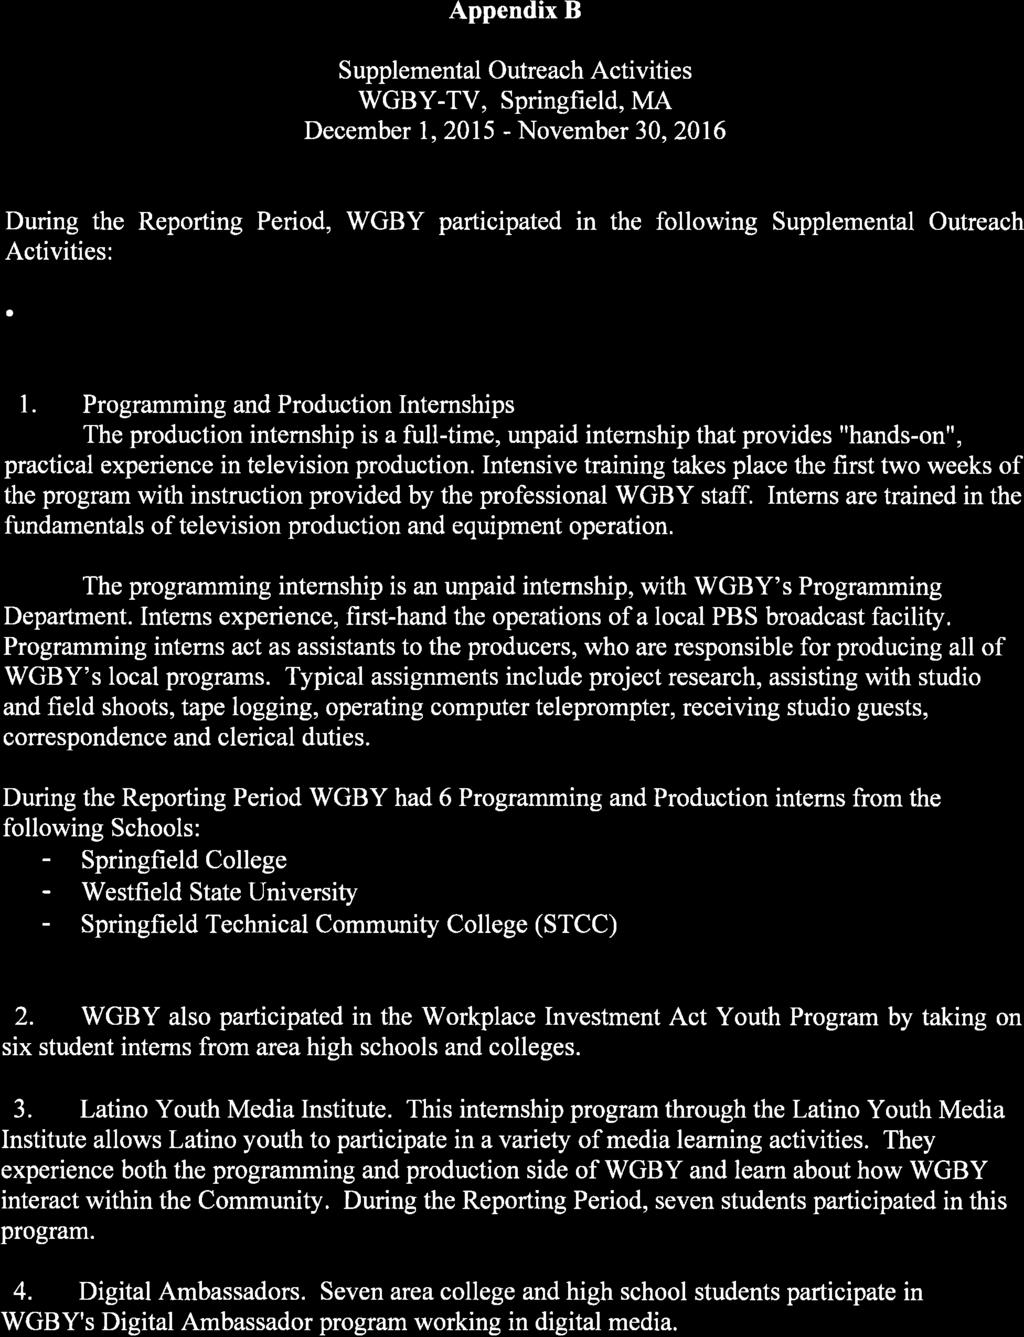 Appendix B Supplementl Outrech Activities WGBY-TV, Springfield, MA December 1,2015 - November 30,2016 During the Reporting Period, WGBY prticipted in the following Supplementl Outrech Activities: